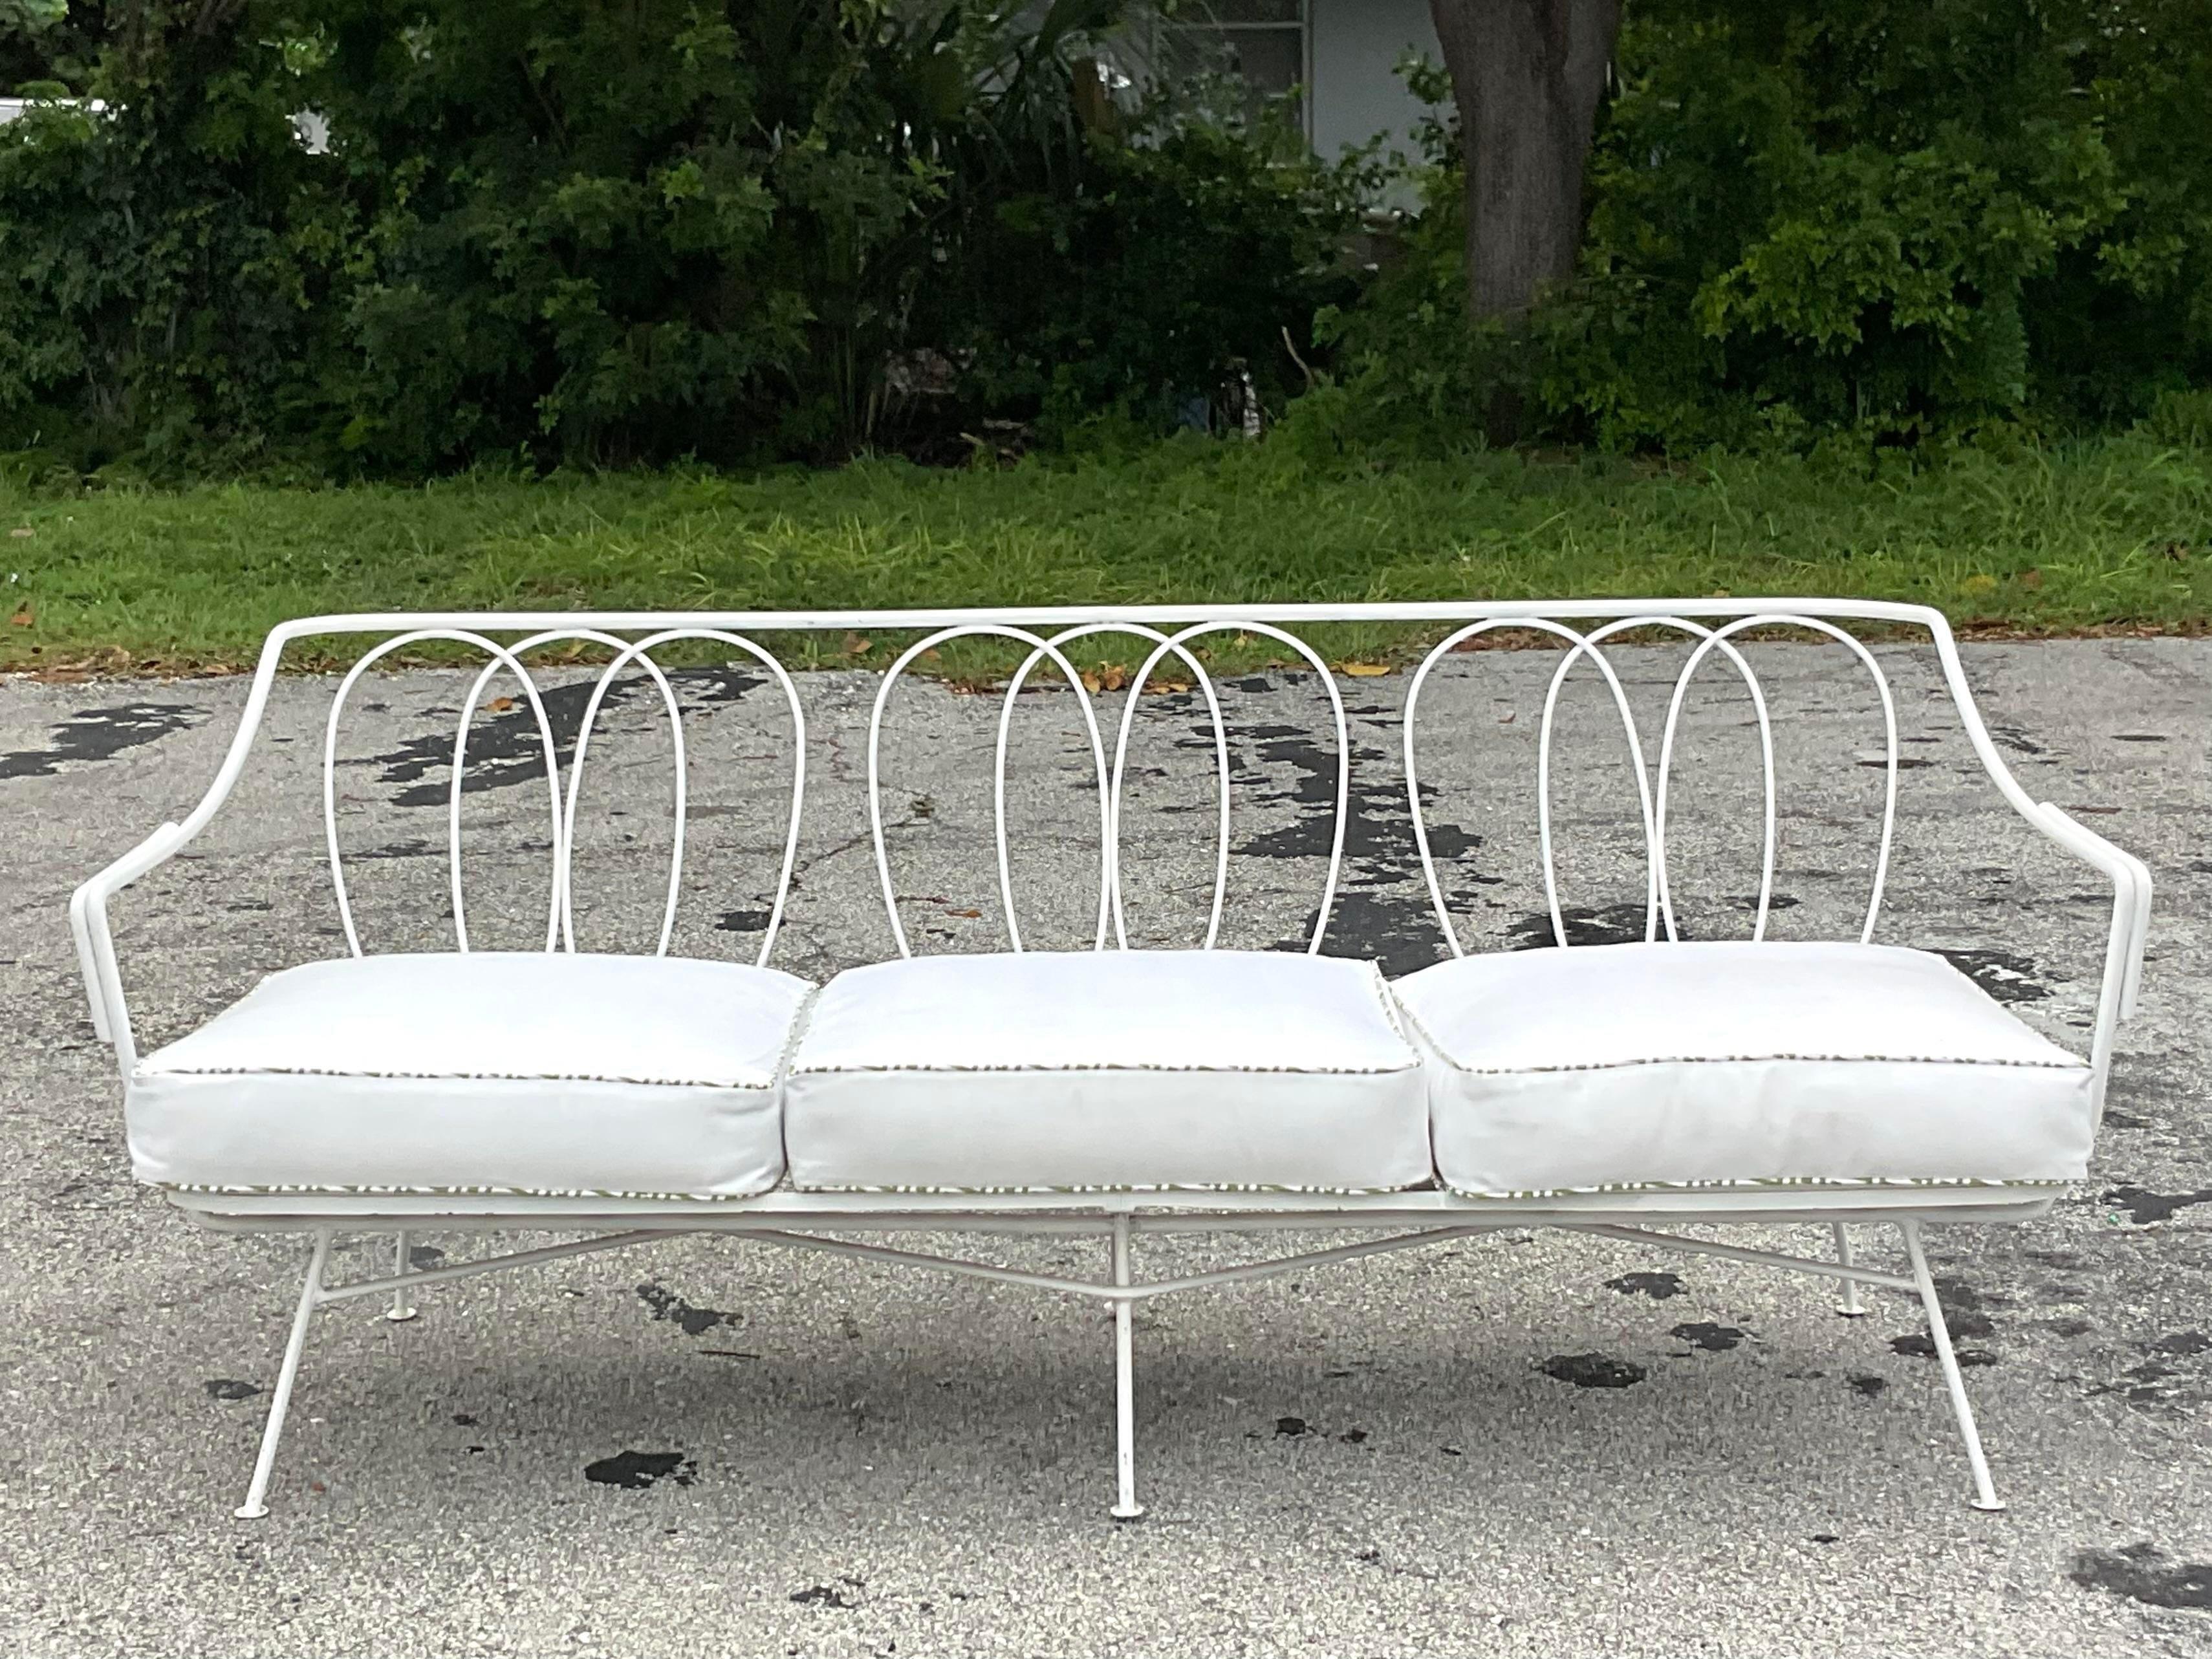 A fantastic vintage Outdoor wrought iron sofa. Beautiful loop design with a white painted finish. Done in the manner of Maurizio Tempestini for Salterini. Coordinating cushions with green and white welting. Matching chair also available on my page.